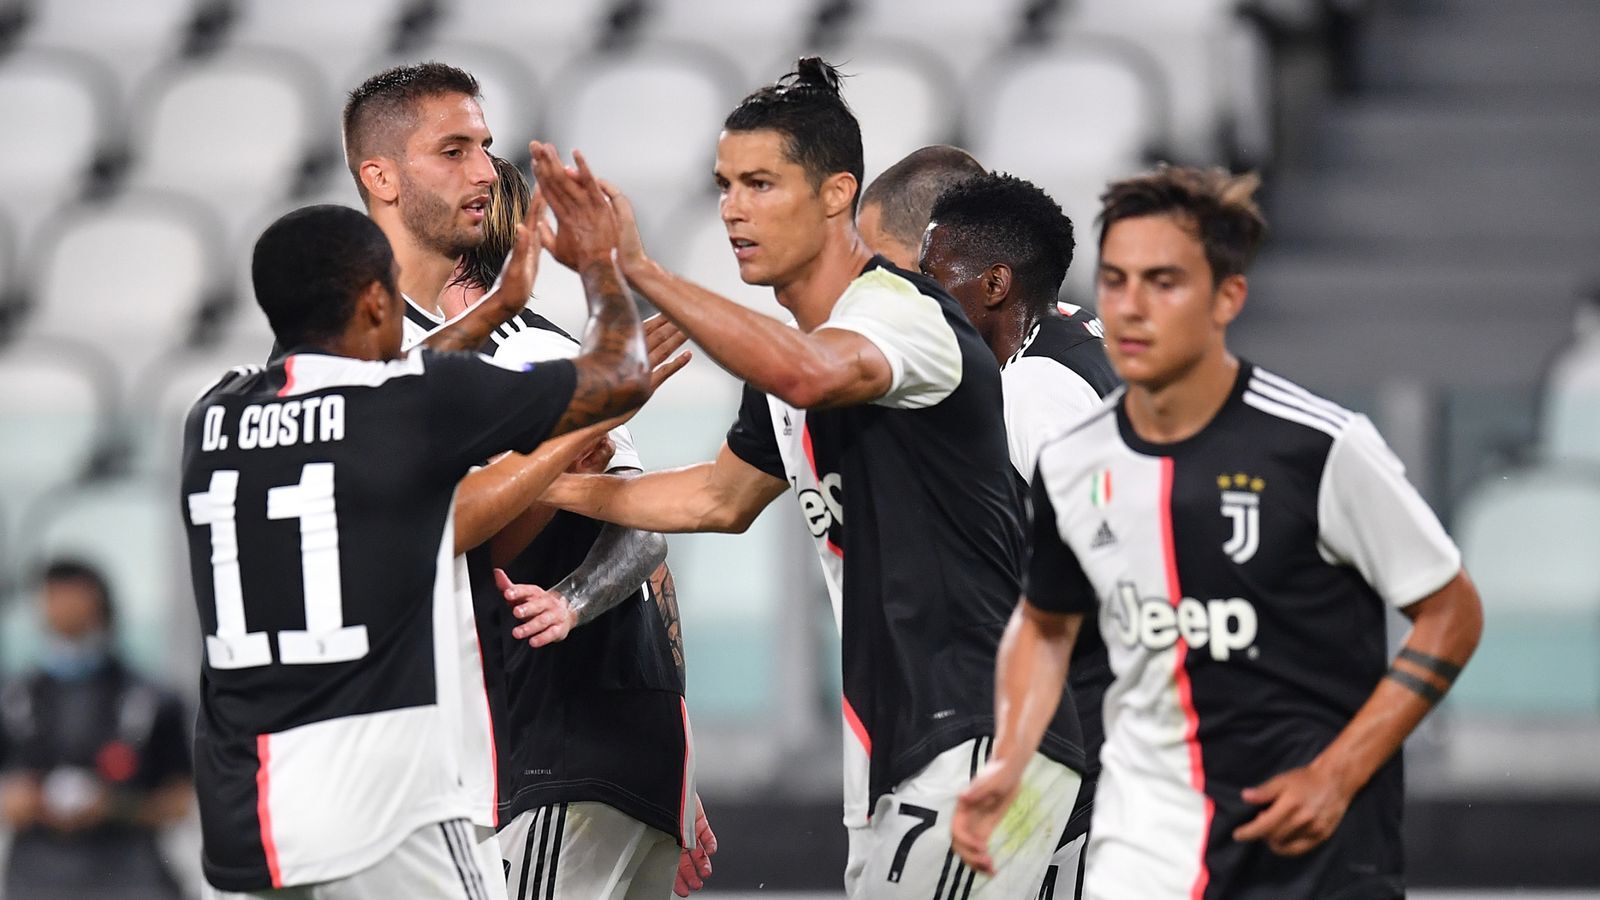 Juventus defeated Lecce 4-0 to pull seven points